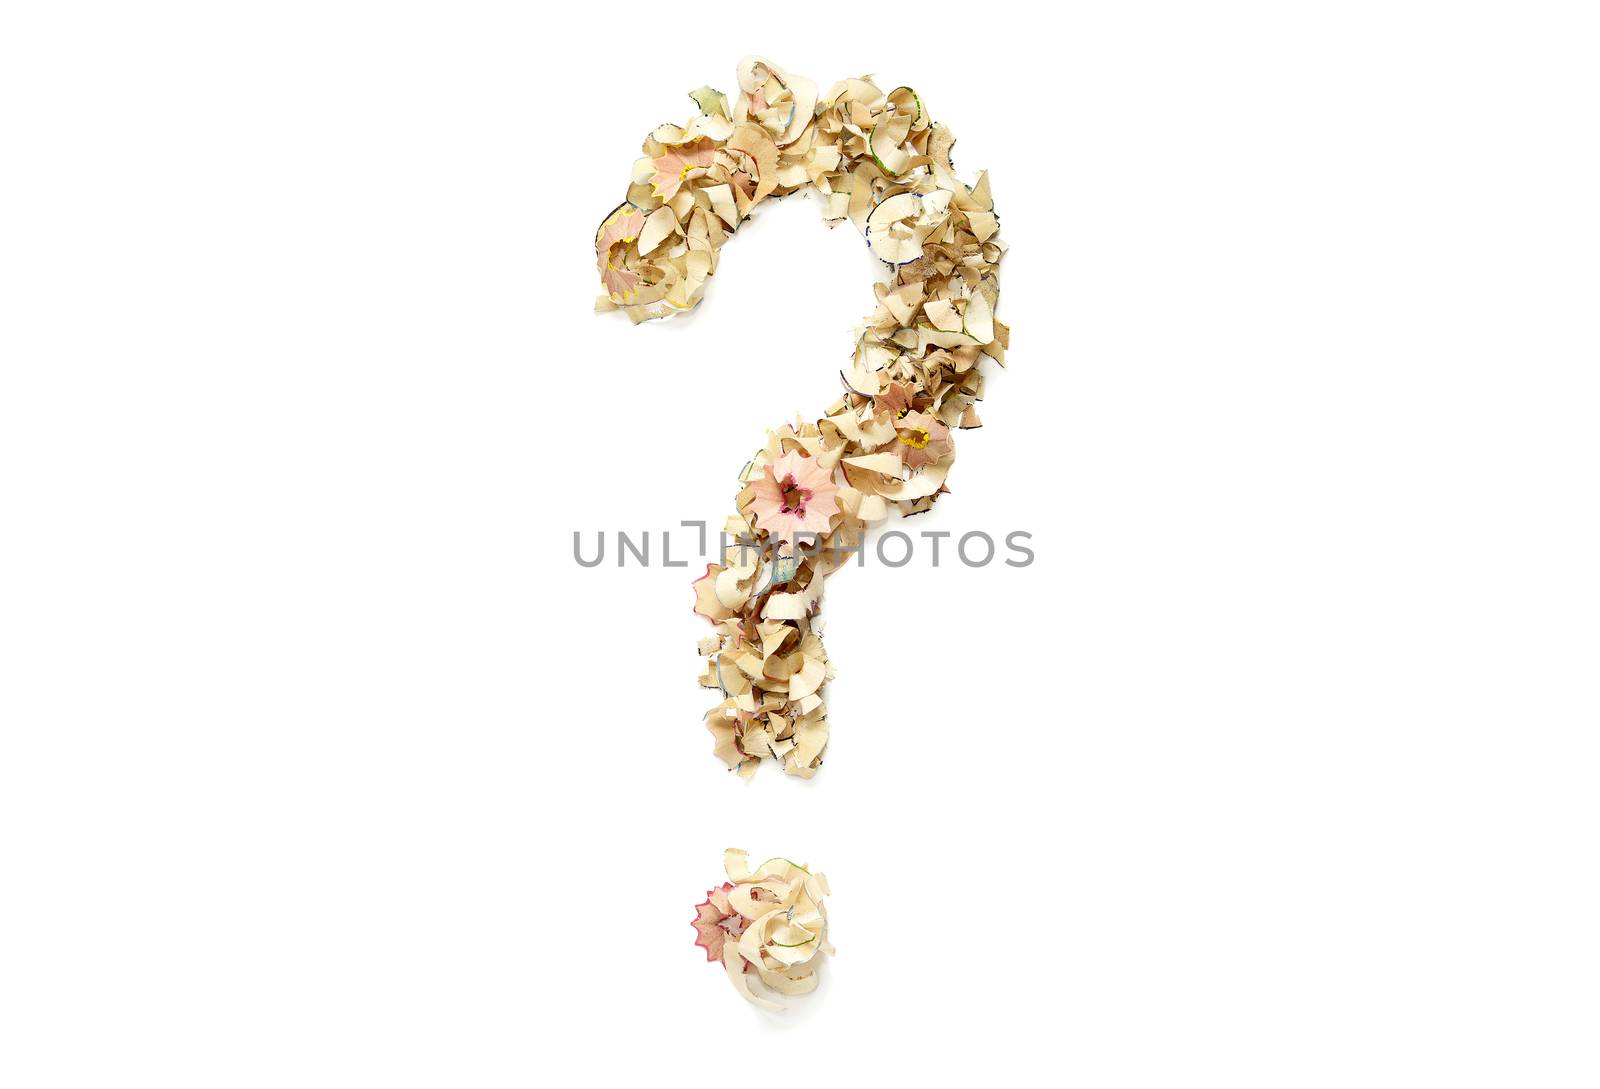 Question mark made from pencil shavings for use in your design.